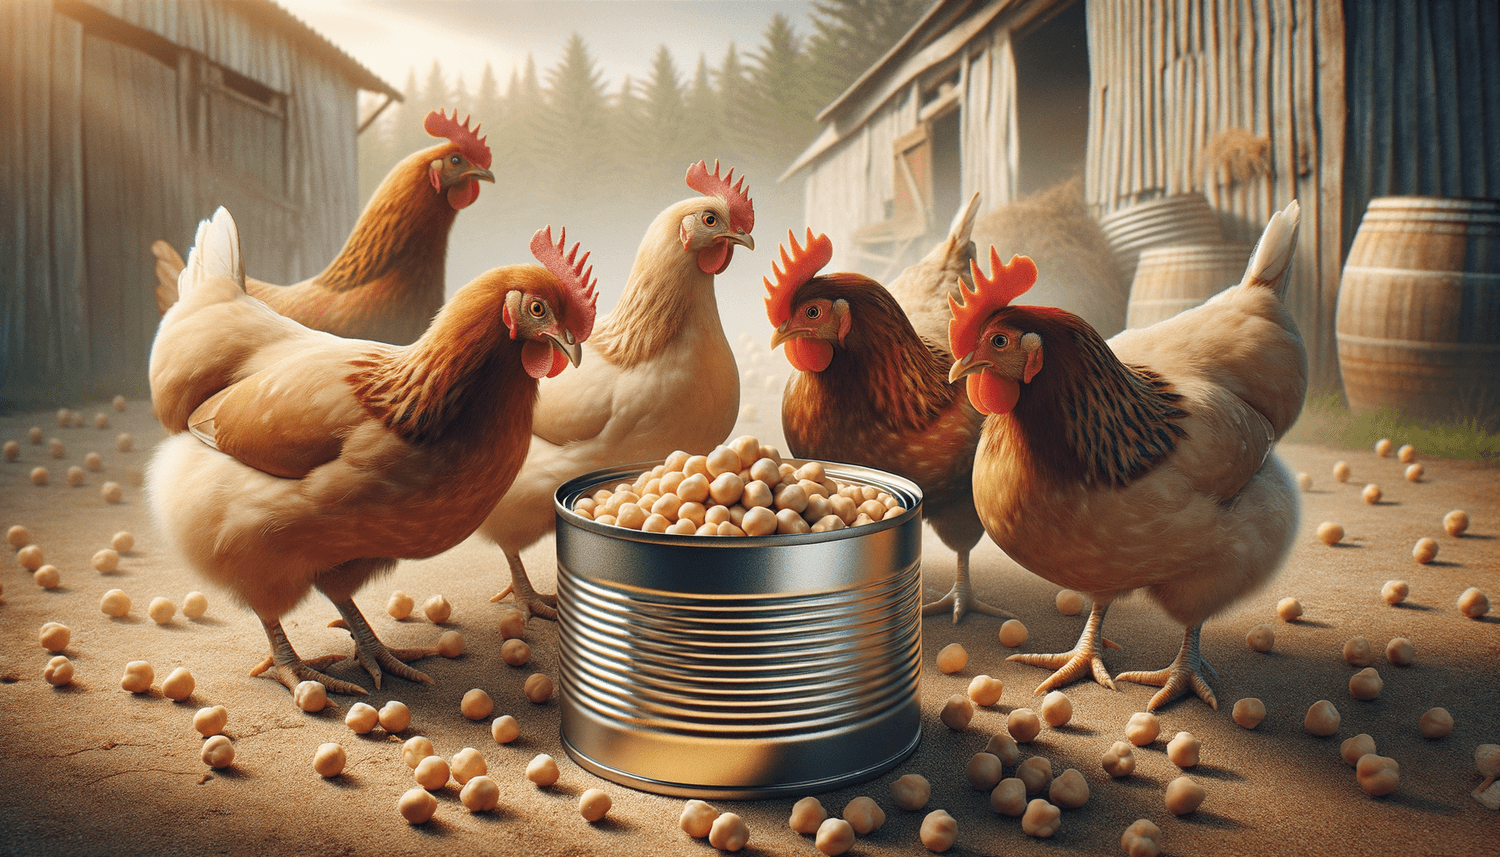 Can Chickens Eat Chickpeas from A Can?